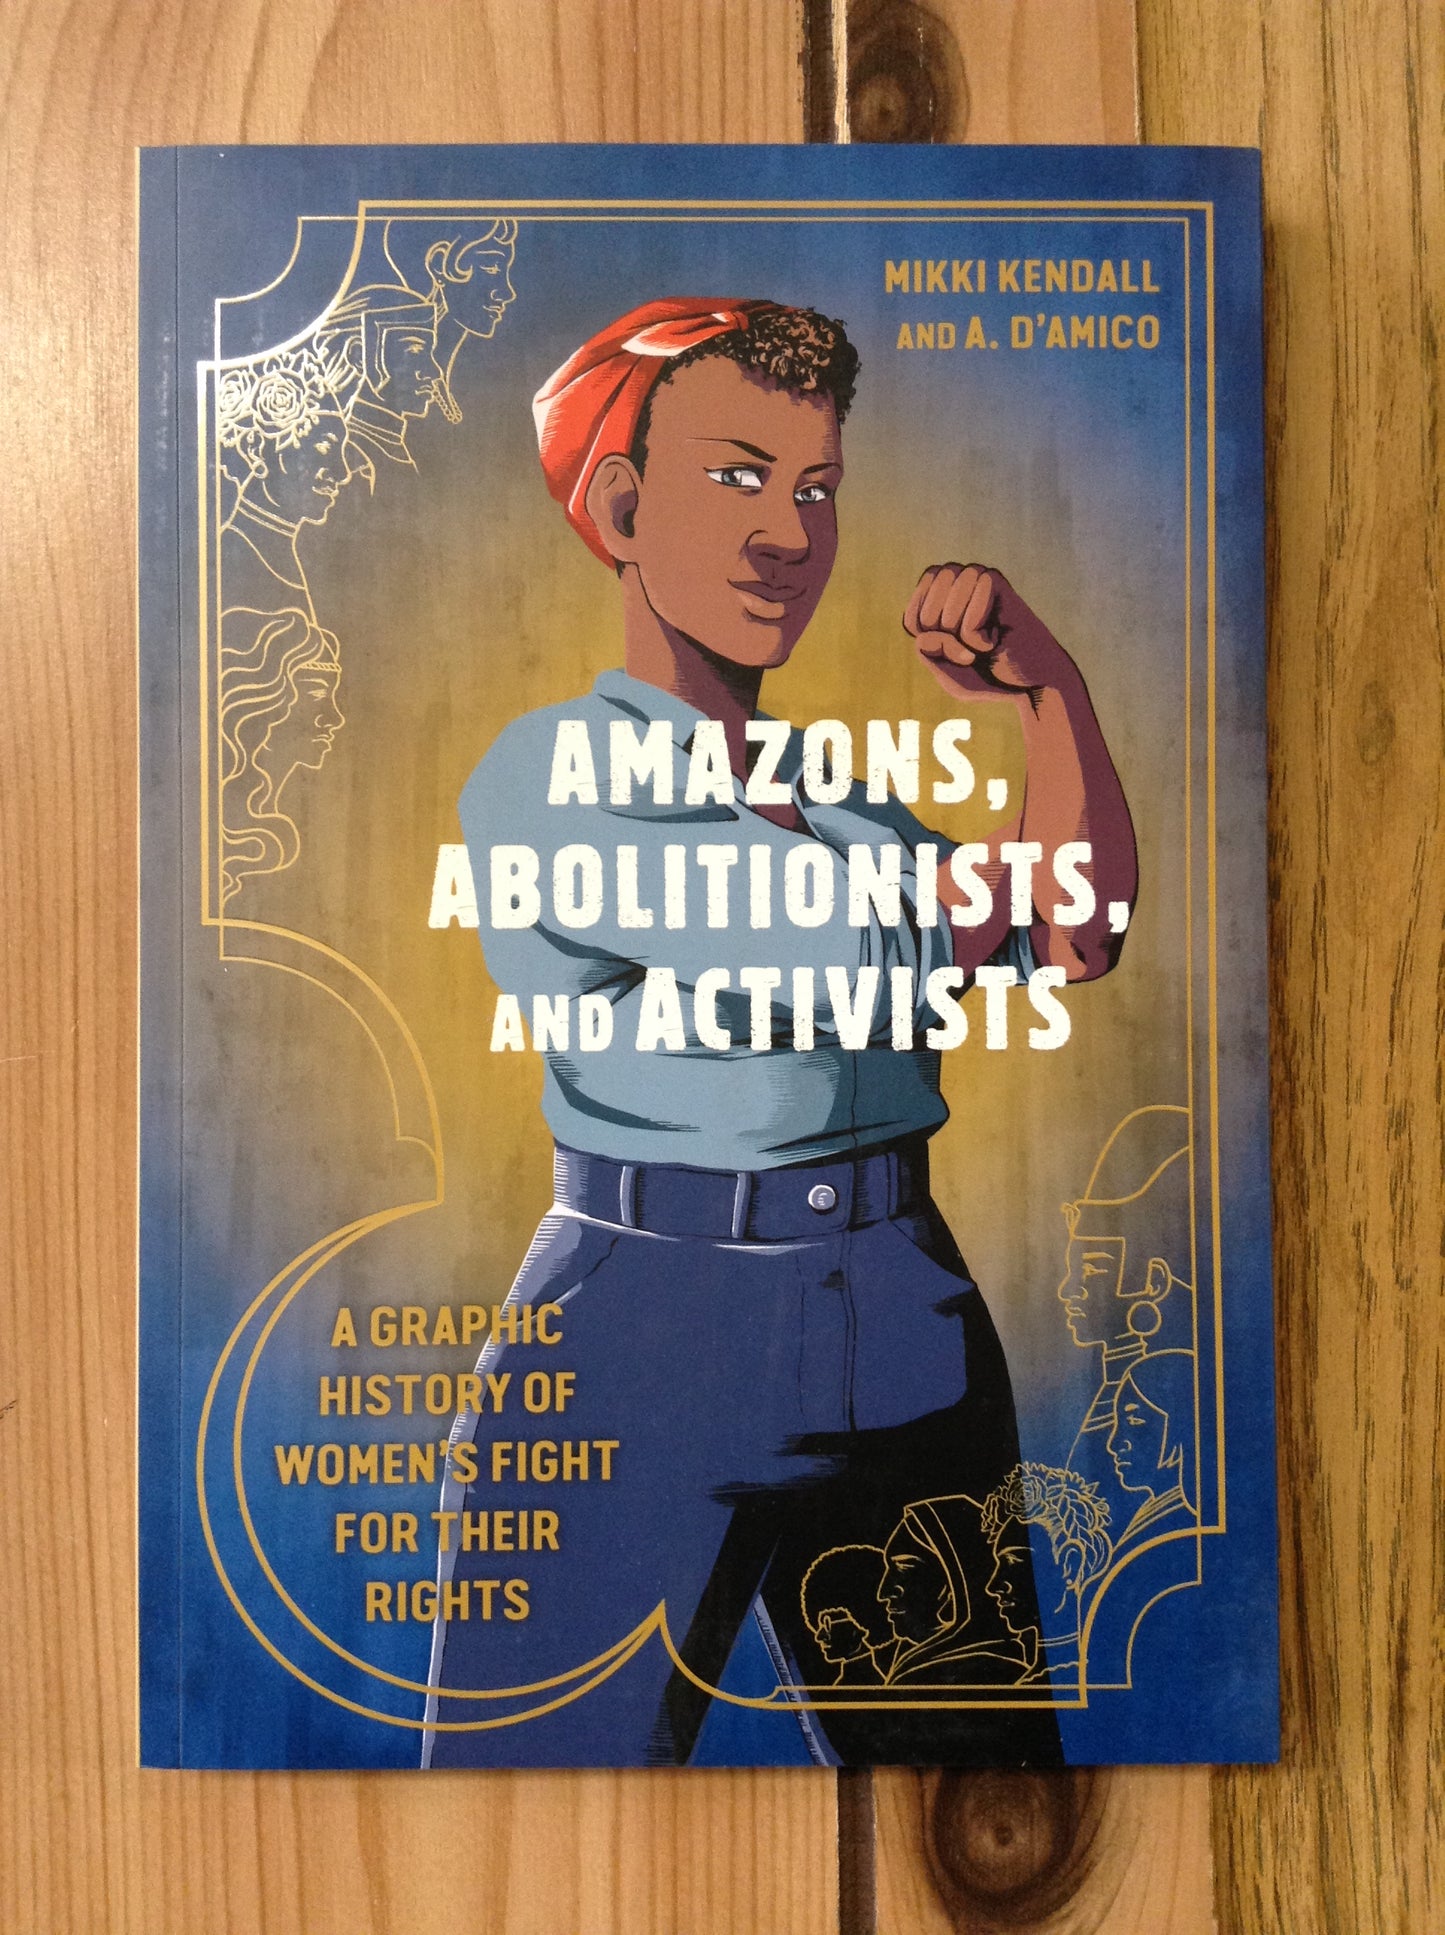 Amazons, Abolitionists, and Activists: A Graphic History of Women's Fight for their Rights